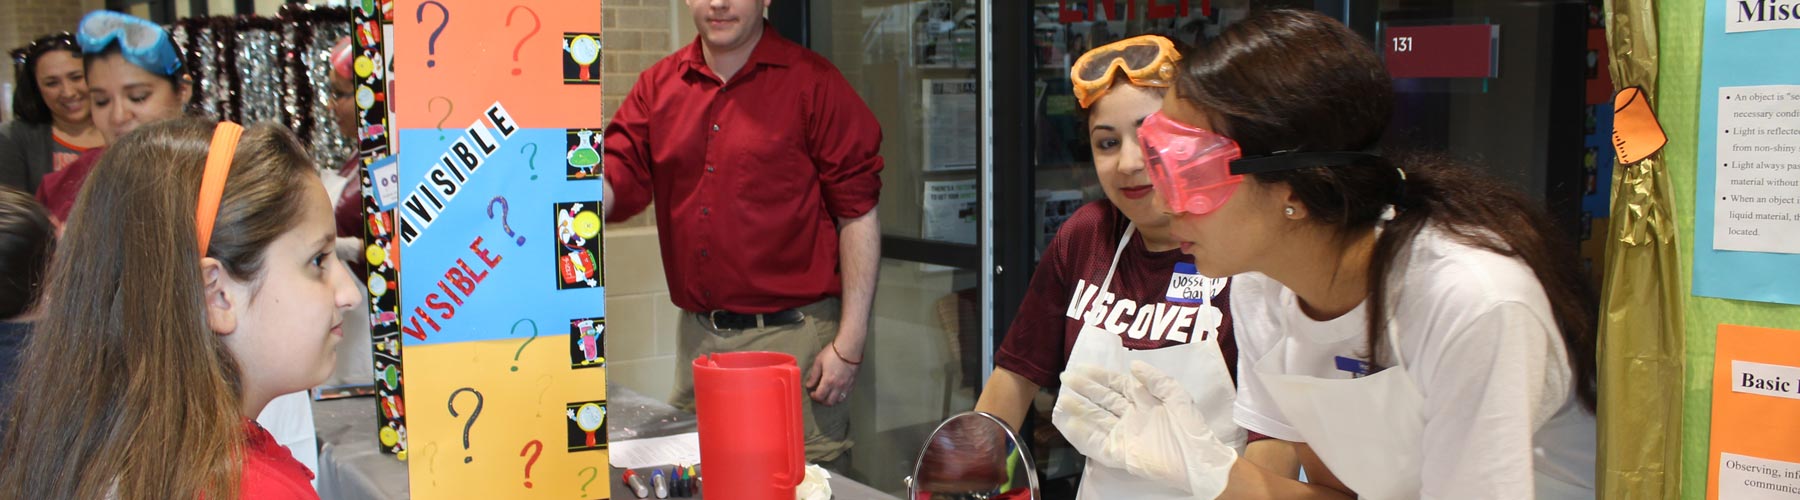 Discover TAMIU 2017 activity with science projects